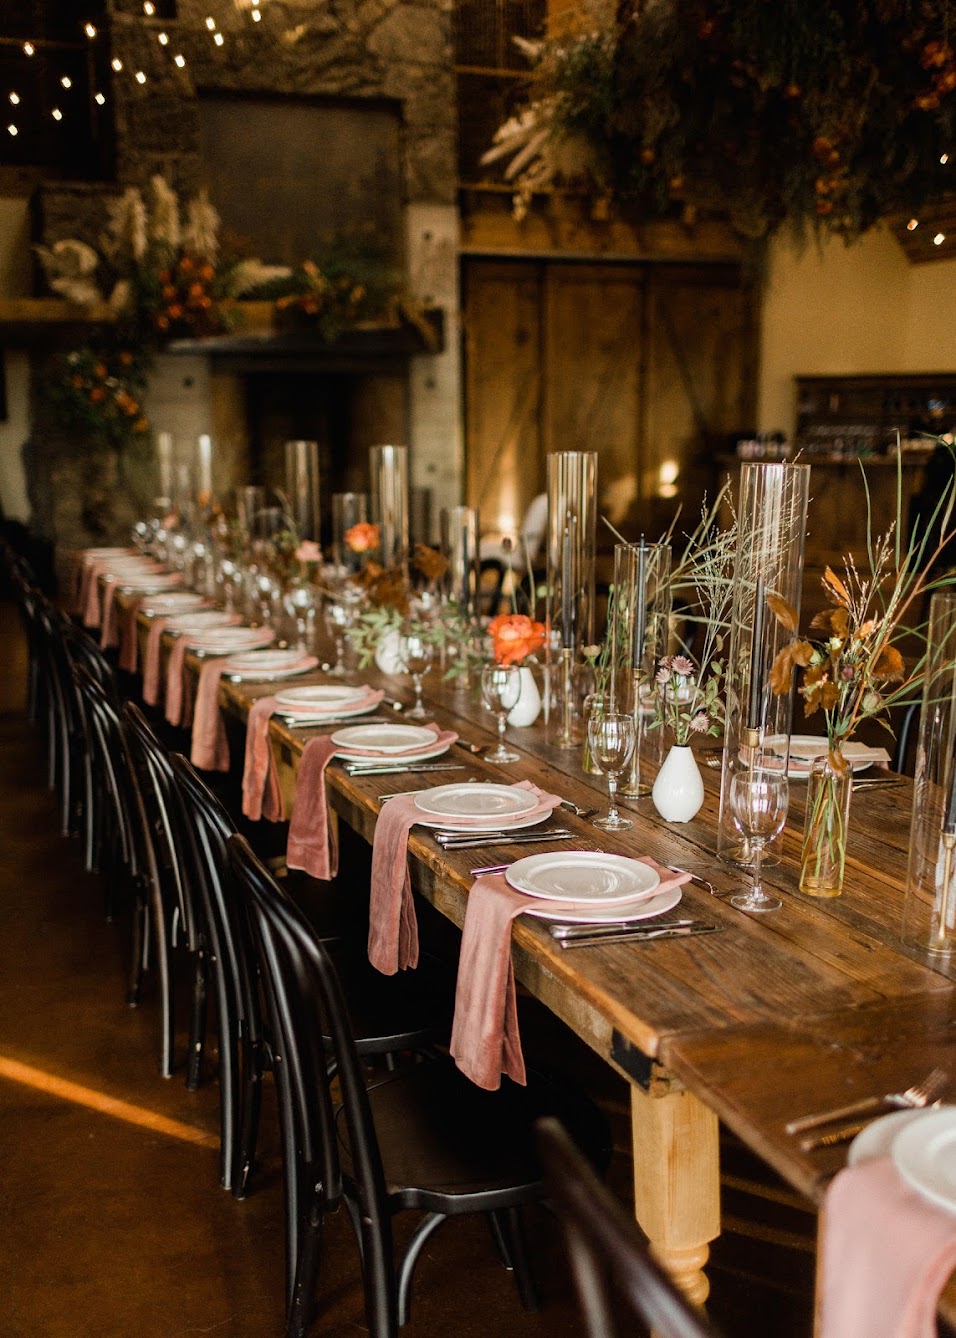 Black bentwood chairs and farm tables for guests to sit at for the wedding reception.